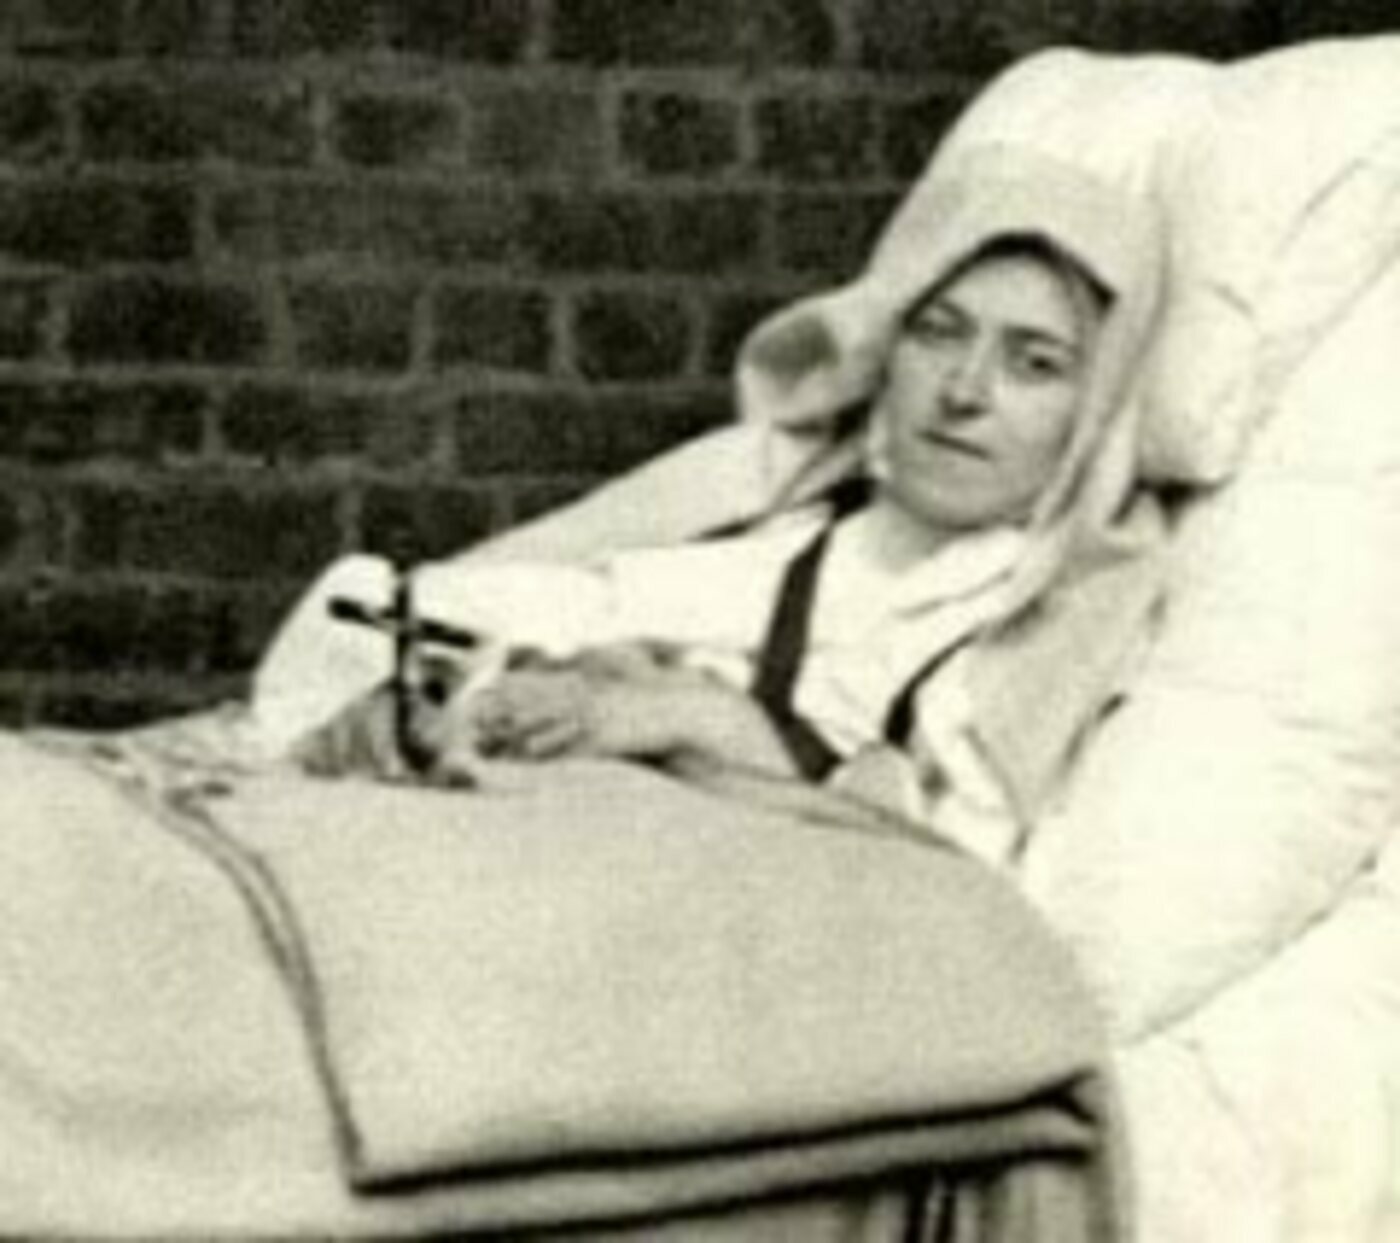 St. Therese on her sick bed.